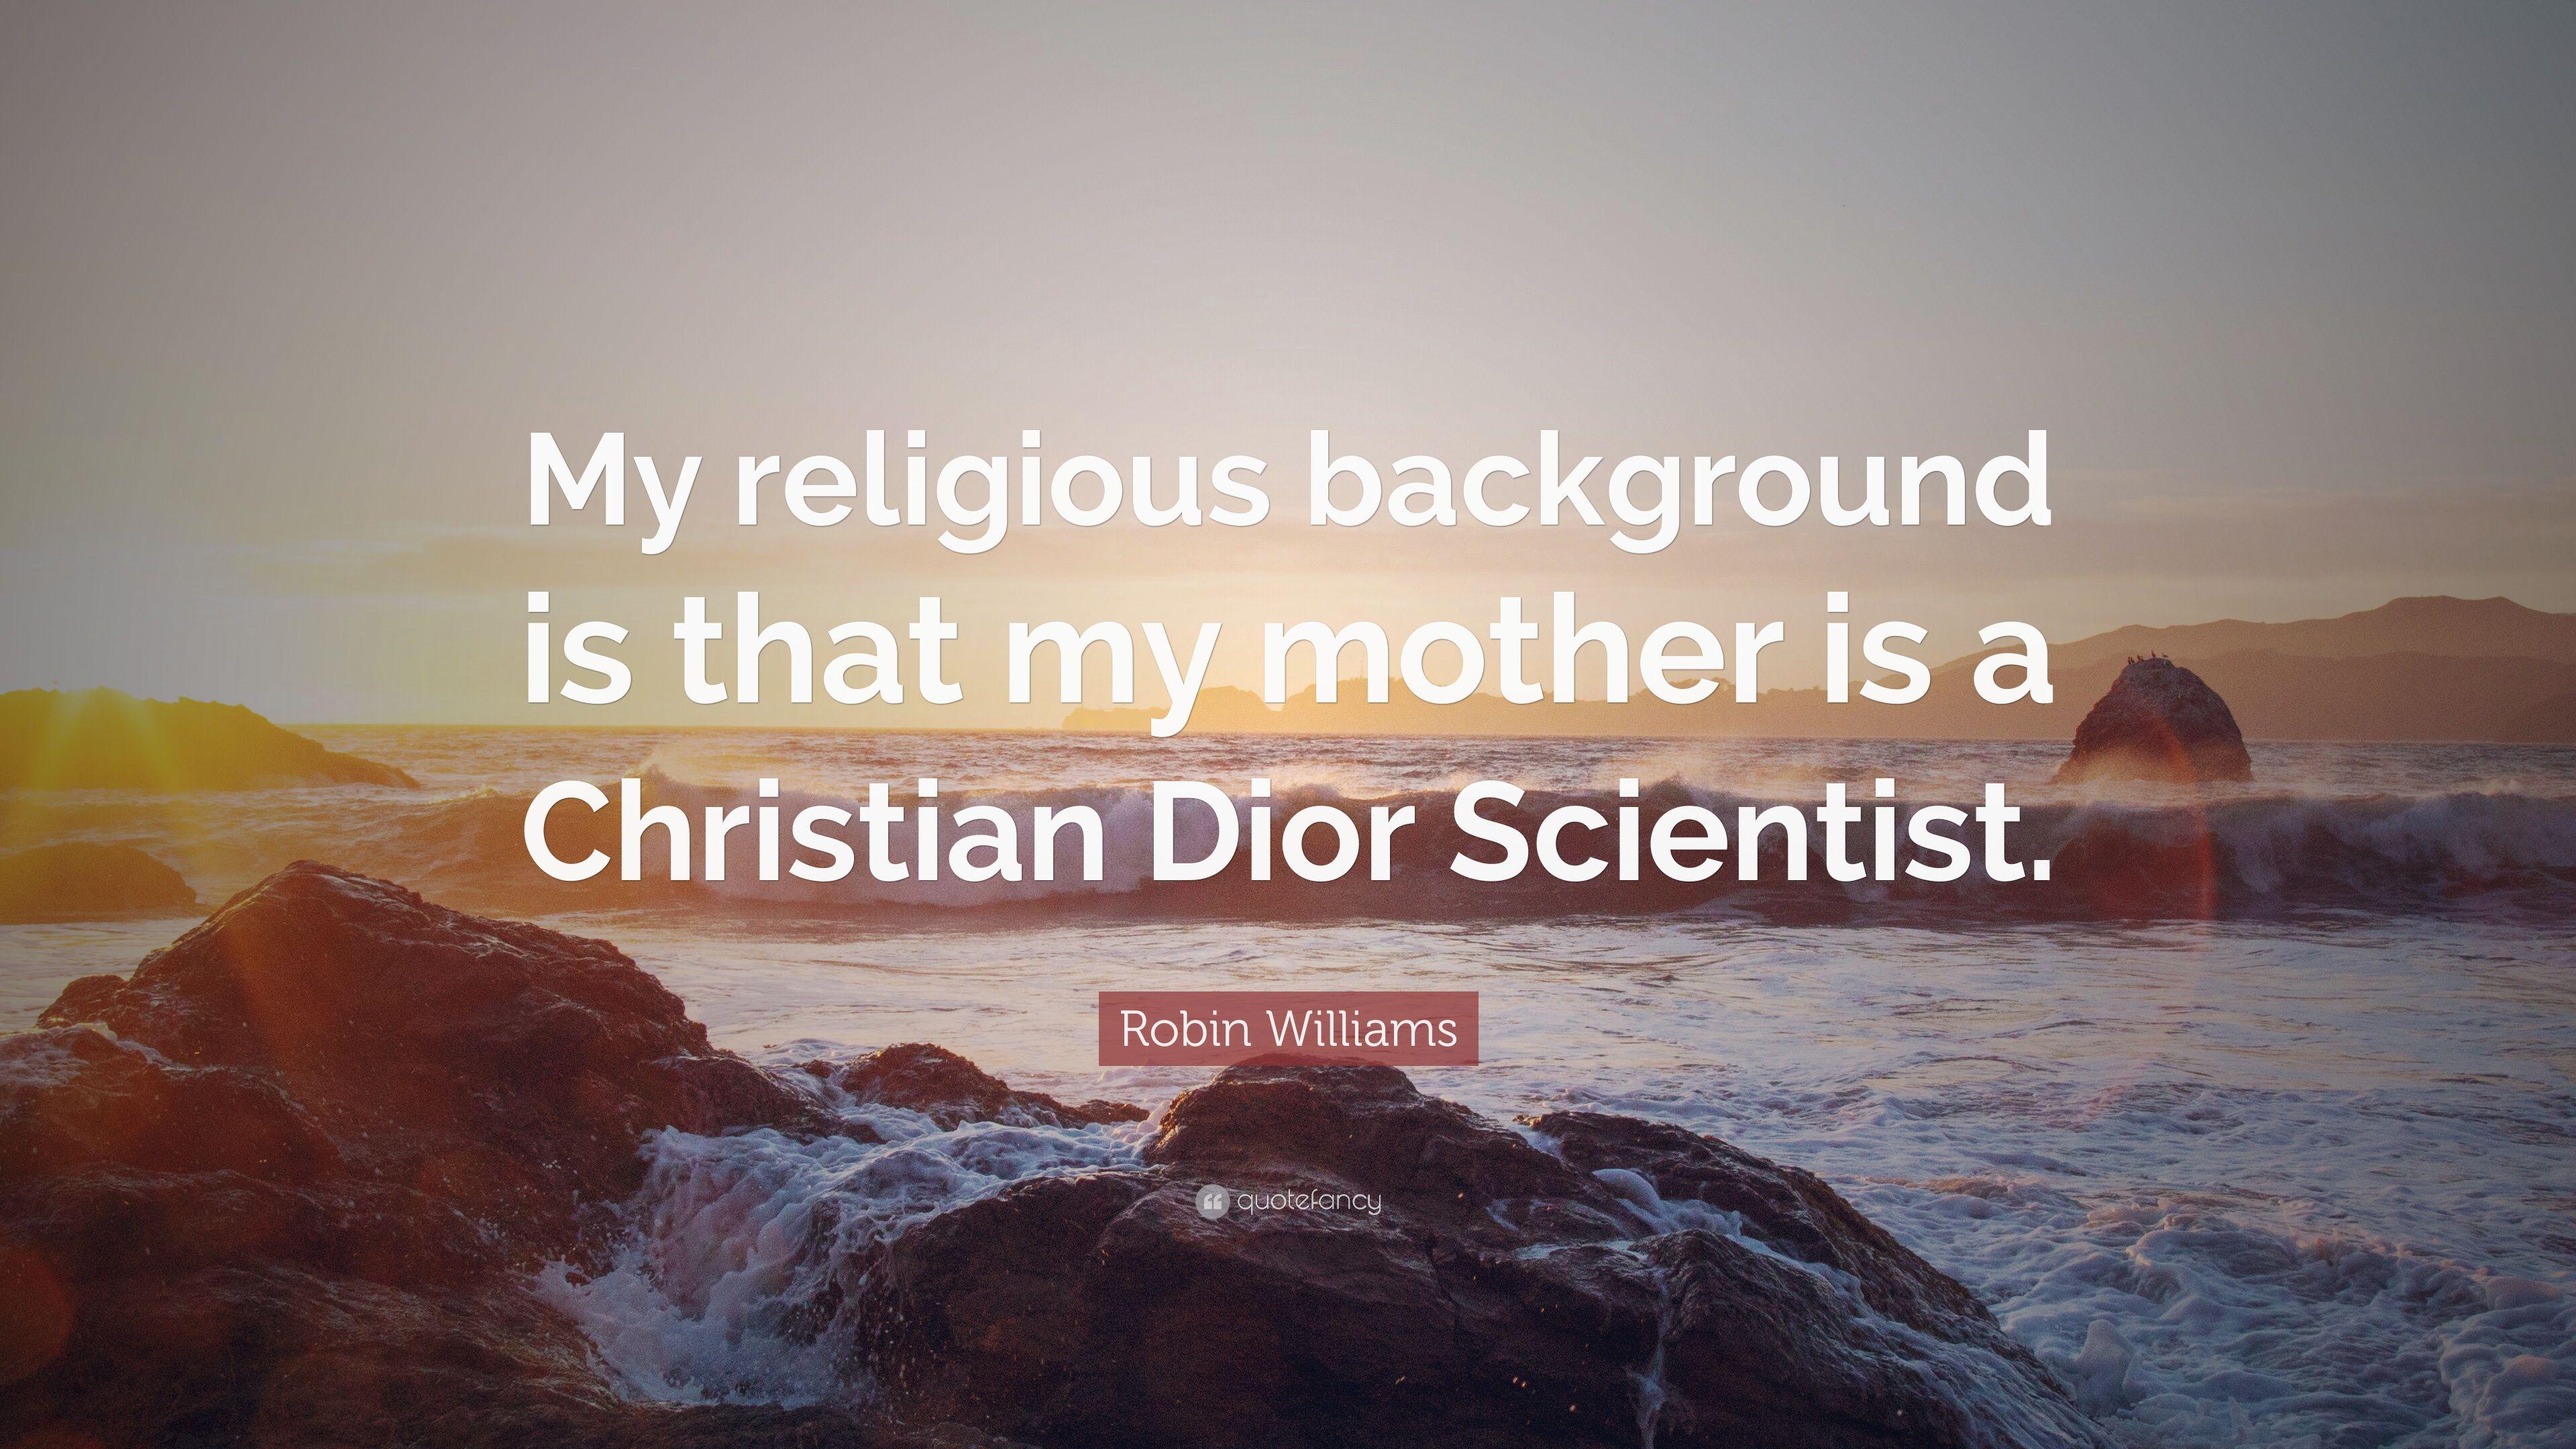 Robin Williams Quote: “My religious background is that my mother is